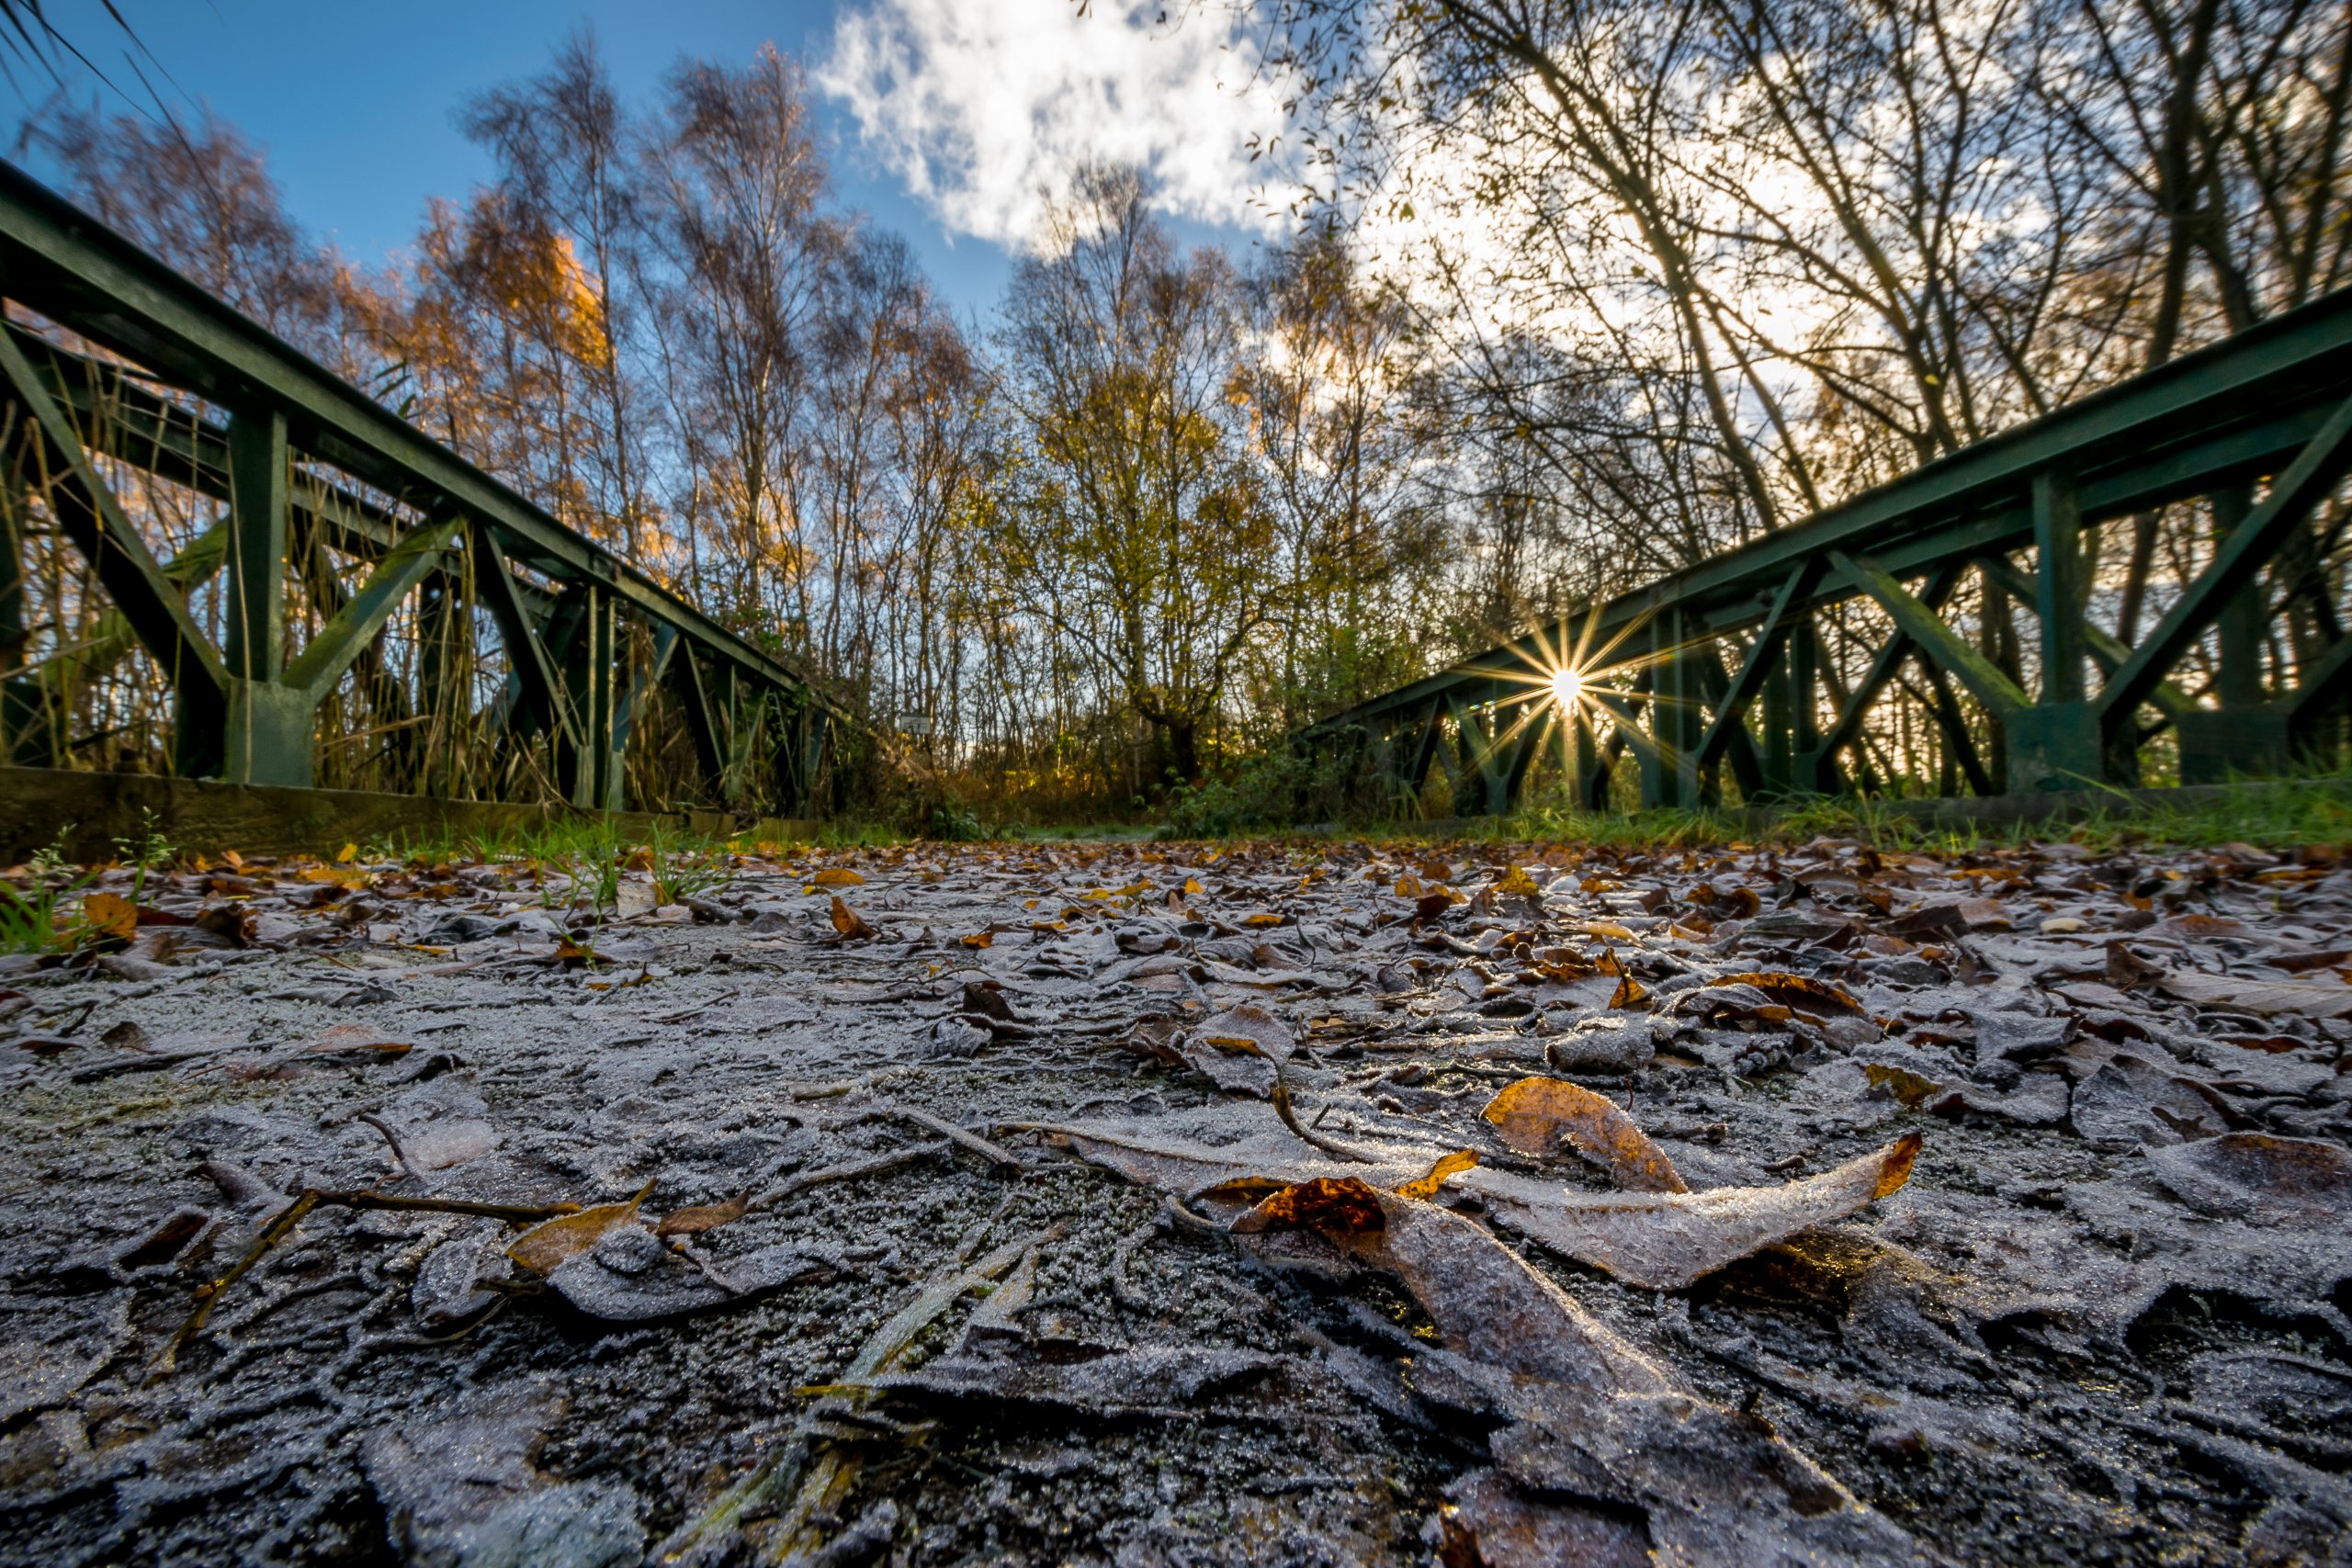 Bailey Bridge at Crowle/Thorne Moors - Credit: Andy Mappouras